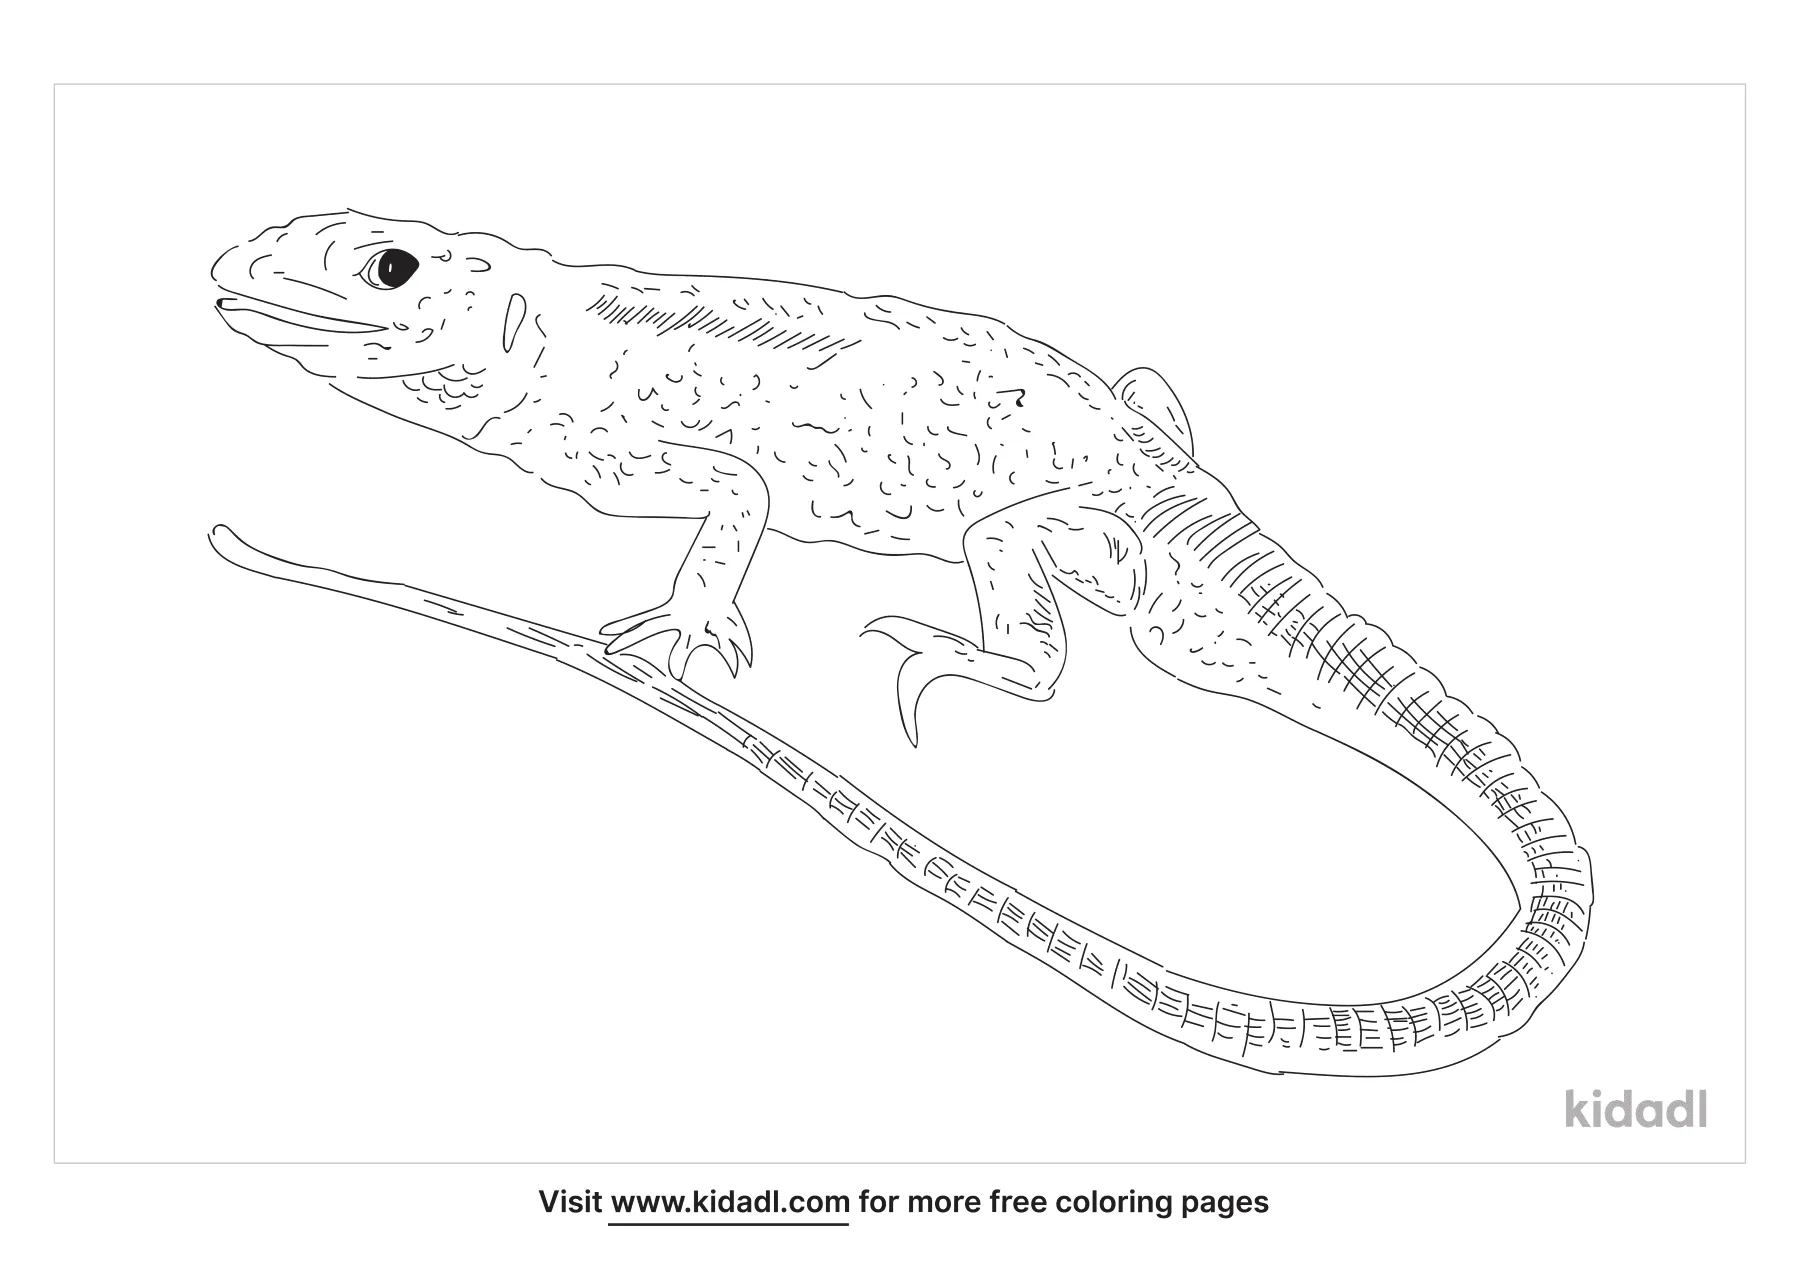 crested gecko coloring pages